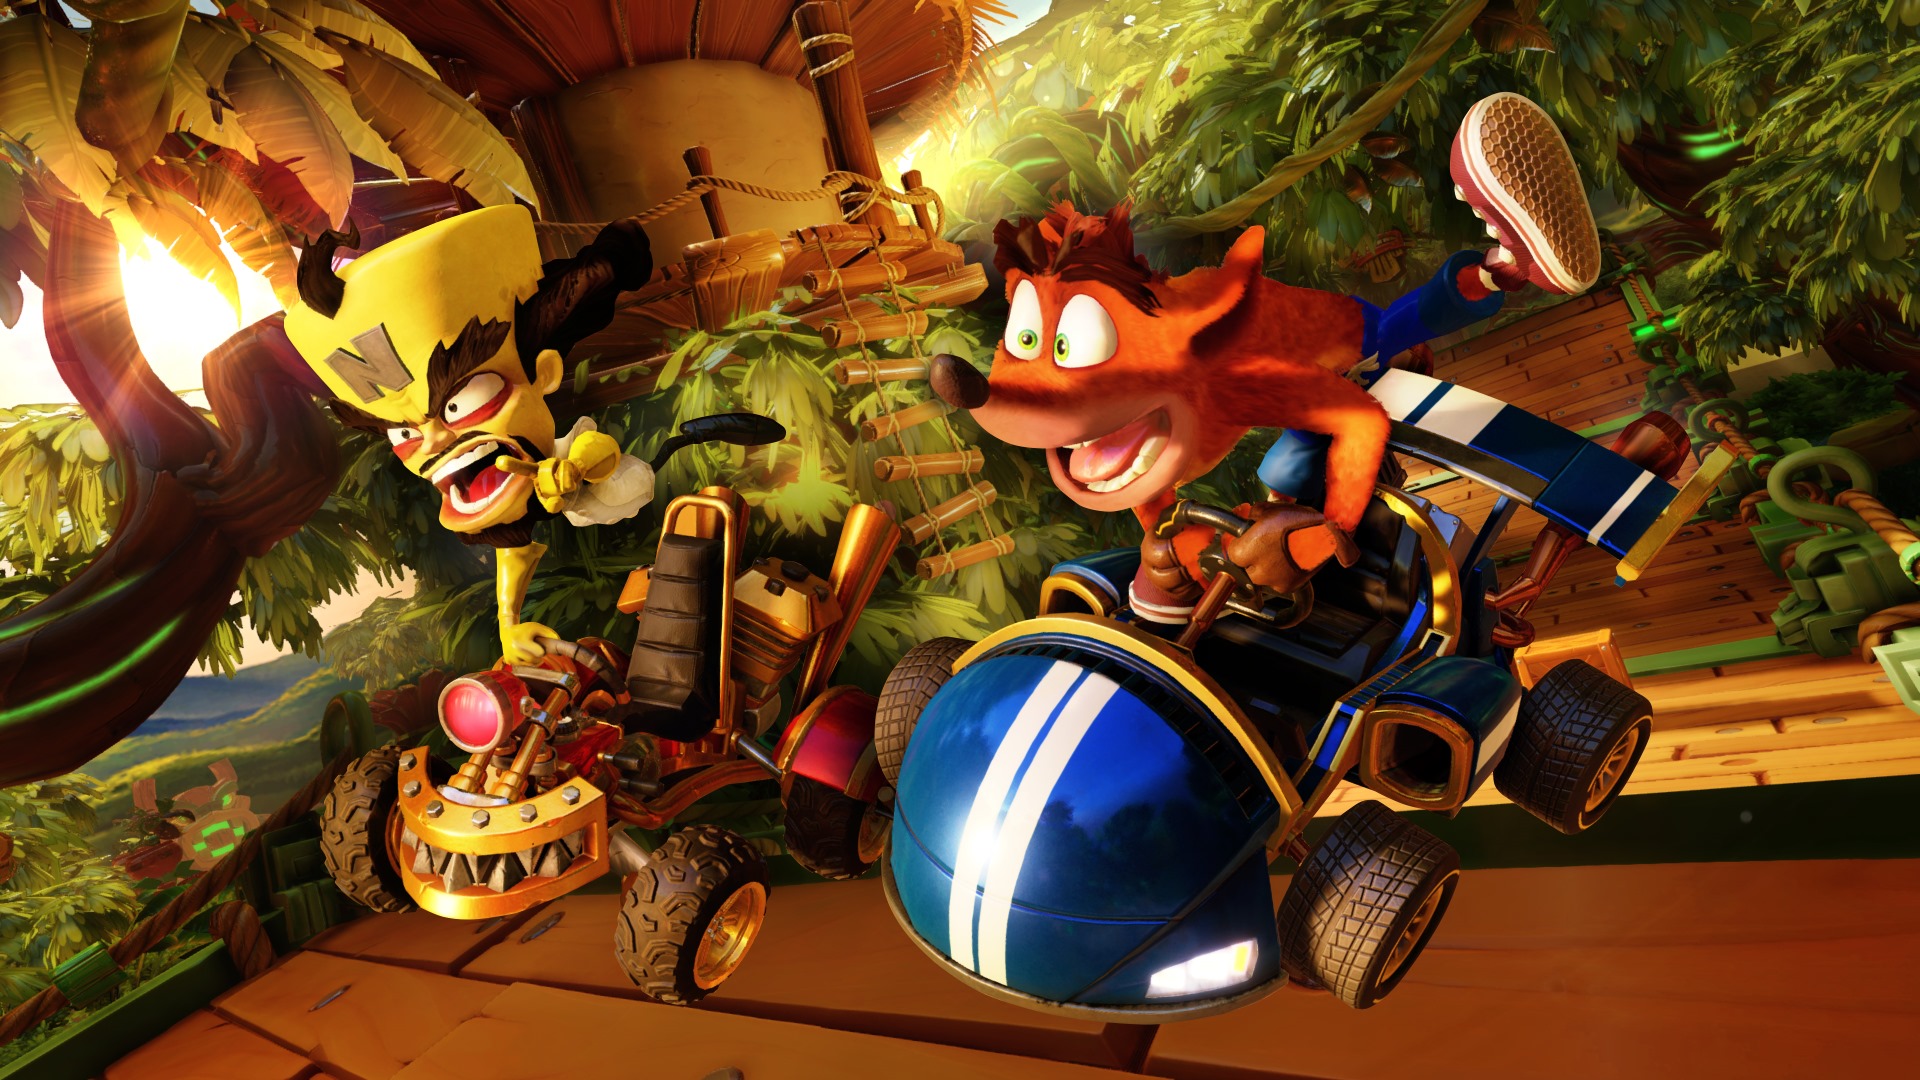 halvkugle I de fleste tilfælde Scorch Crash Team Racing: Nitro-Fueled Review | Bonus Stage is the world's leading  source for Playstation 5, Xbox Series X, Nintendo Switch, PC, Playstation 4,  Xbox One, 3DS, Wii U, Wii, Playstation 3,